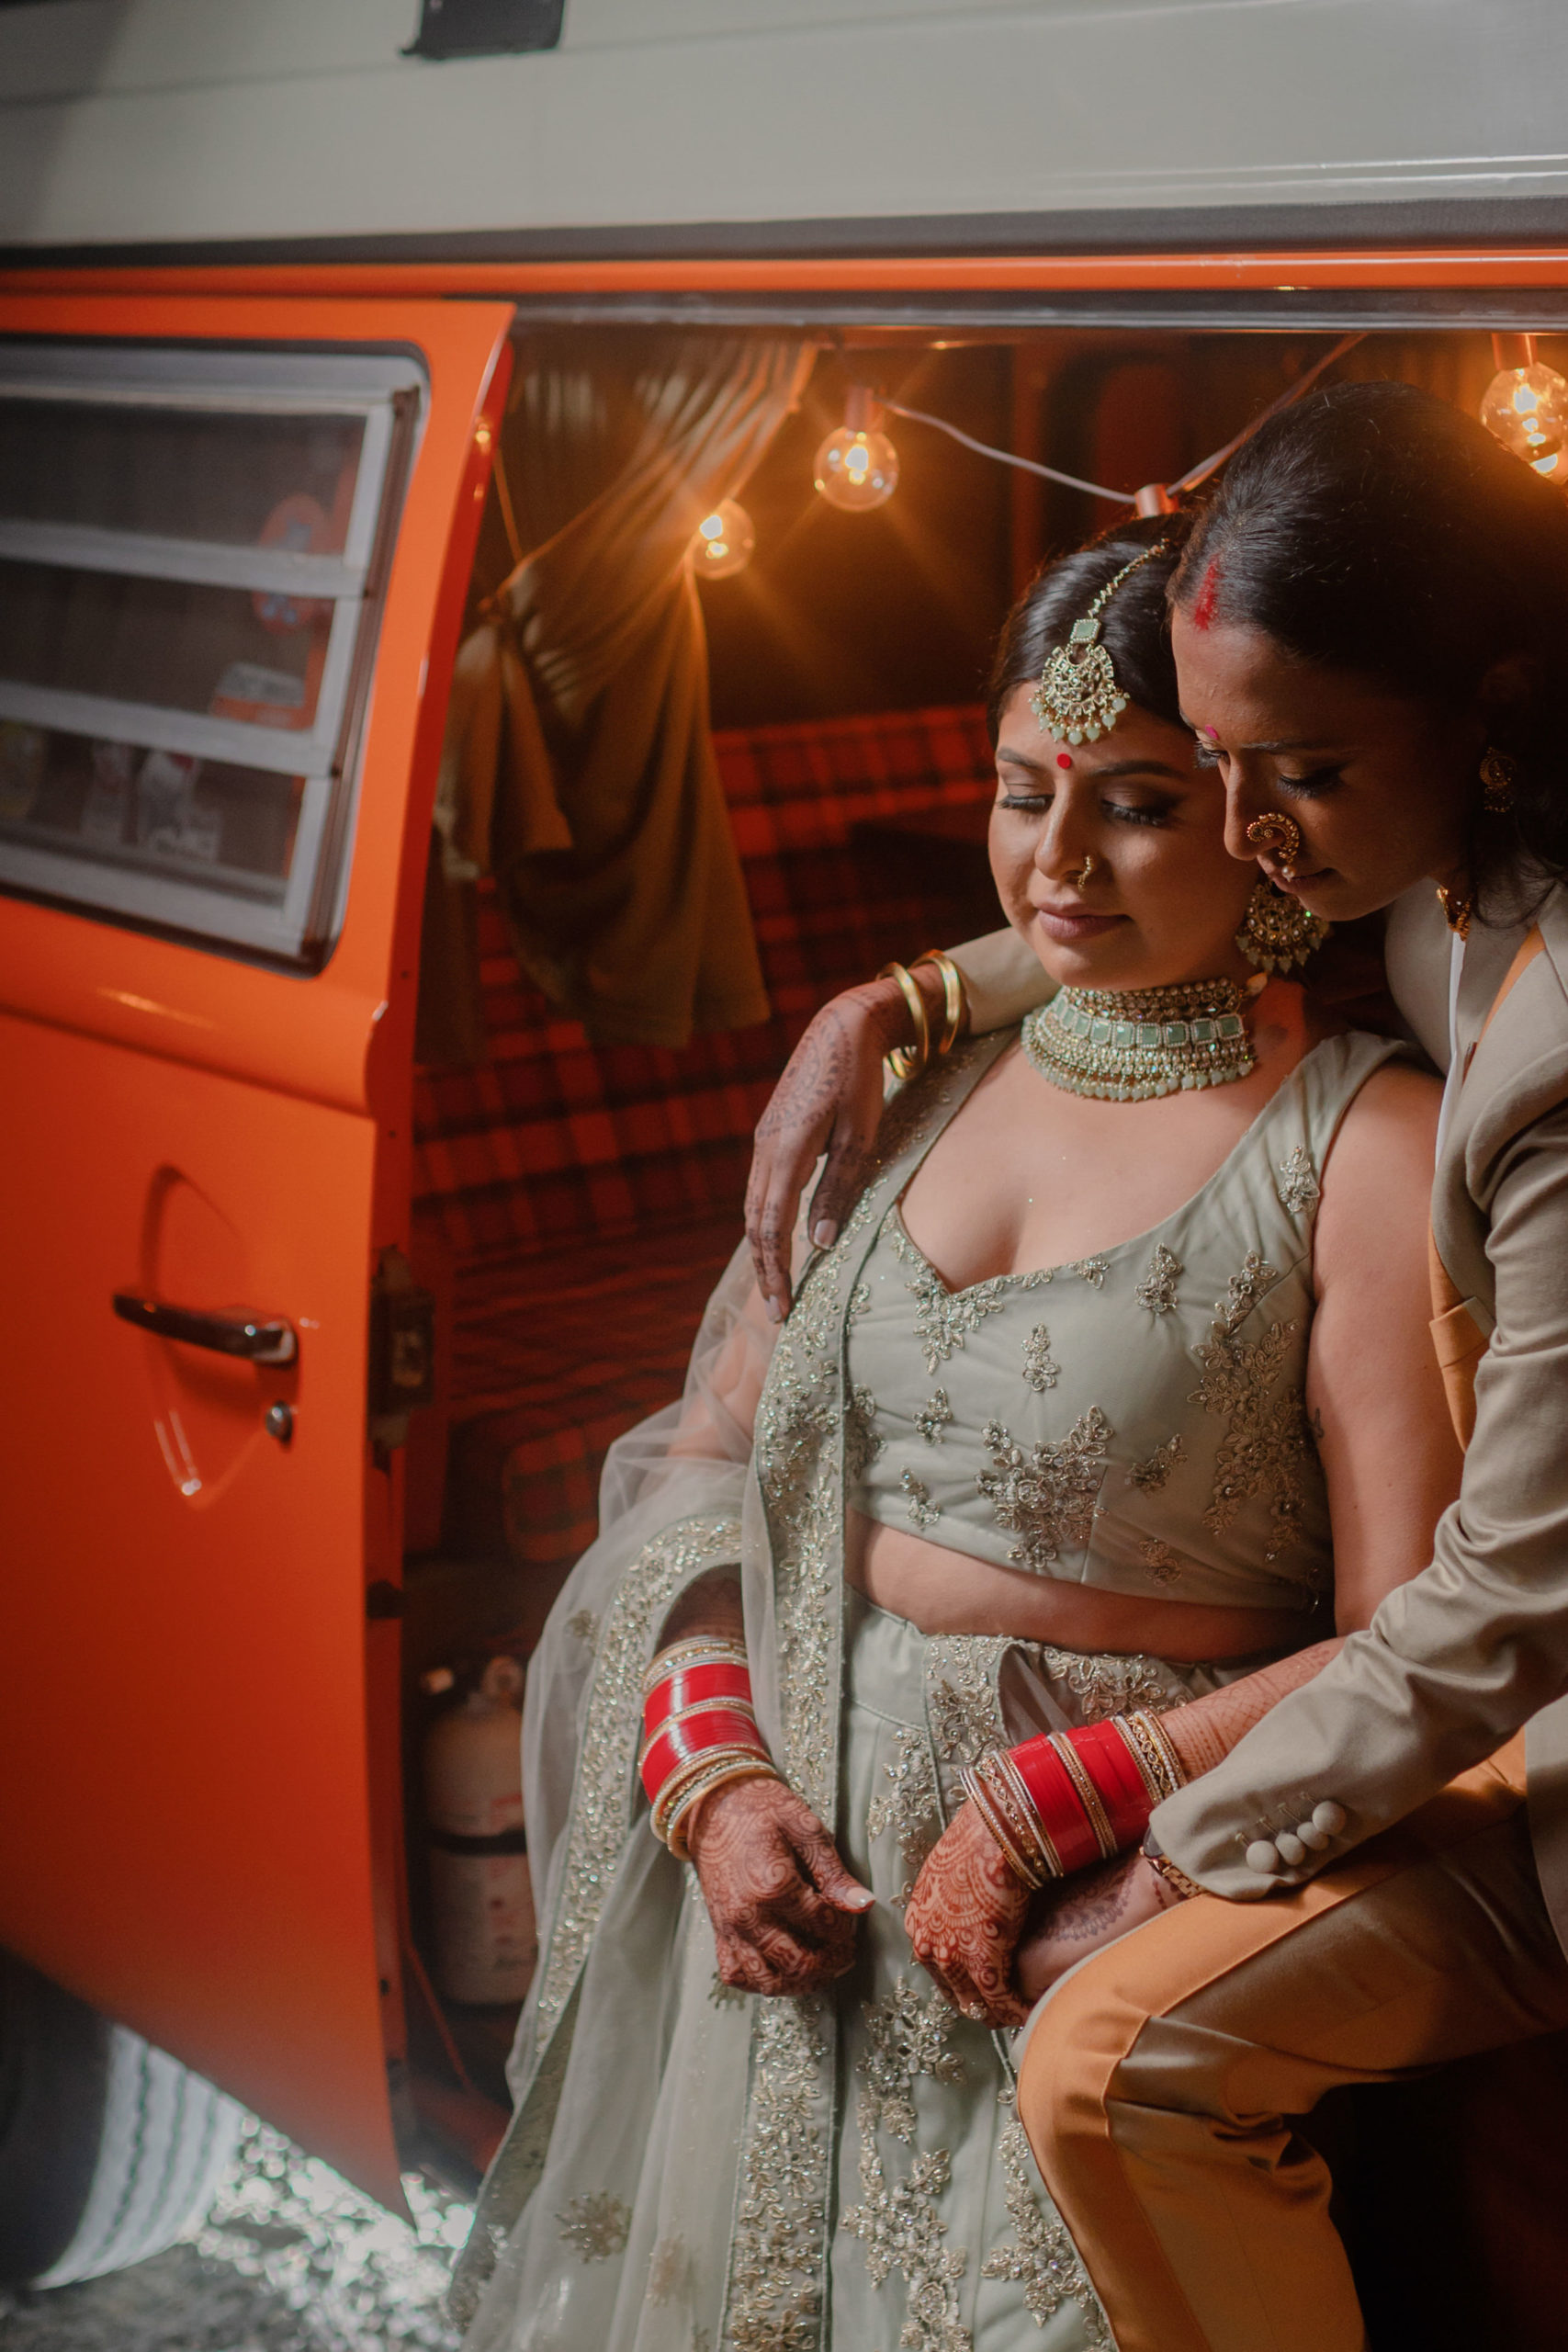 Two South Asian spouses sit in the door of an orange camper van. There are string lights behind them. Both are looking down at the henna decorations on their hands.